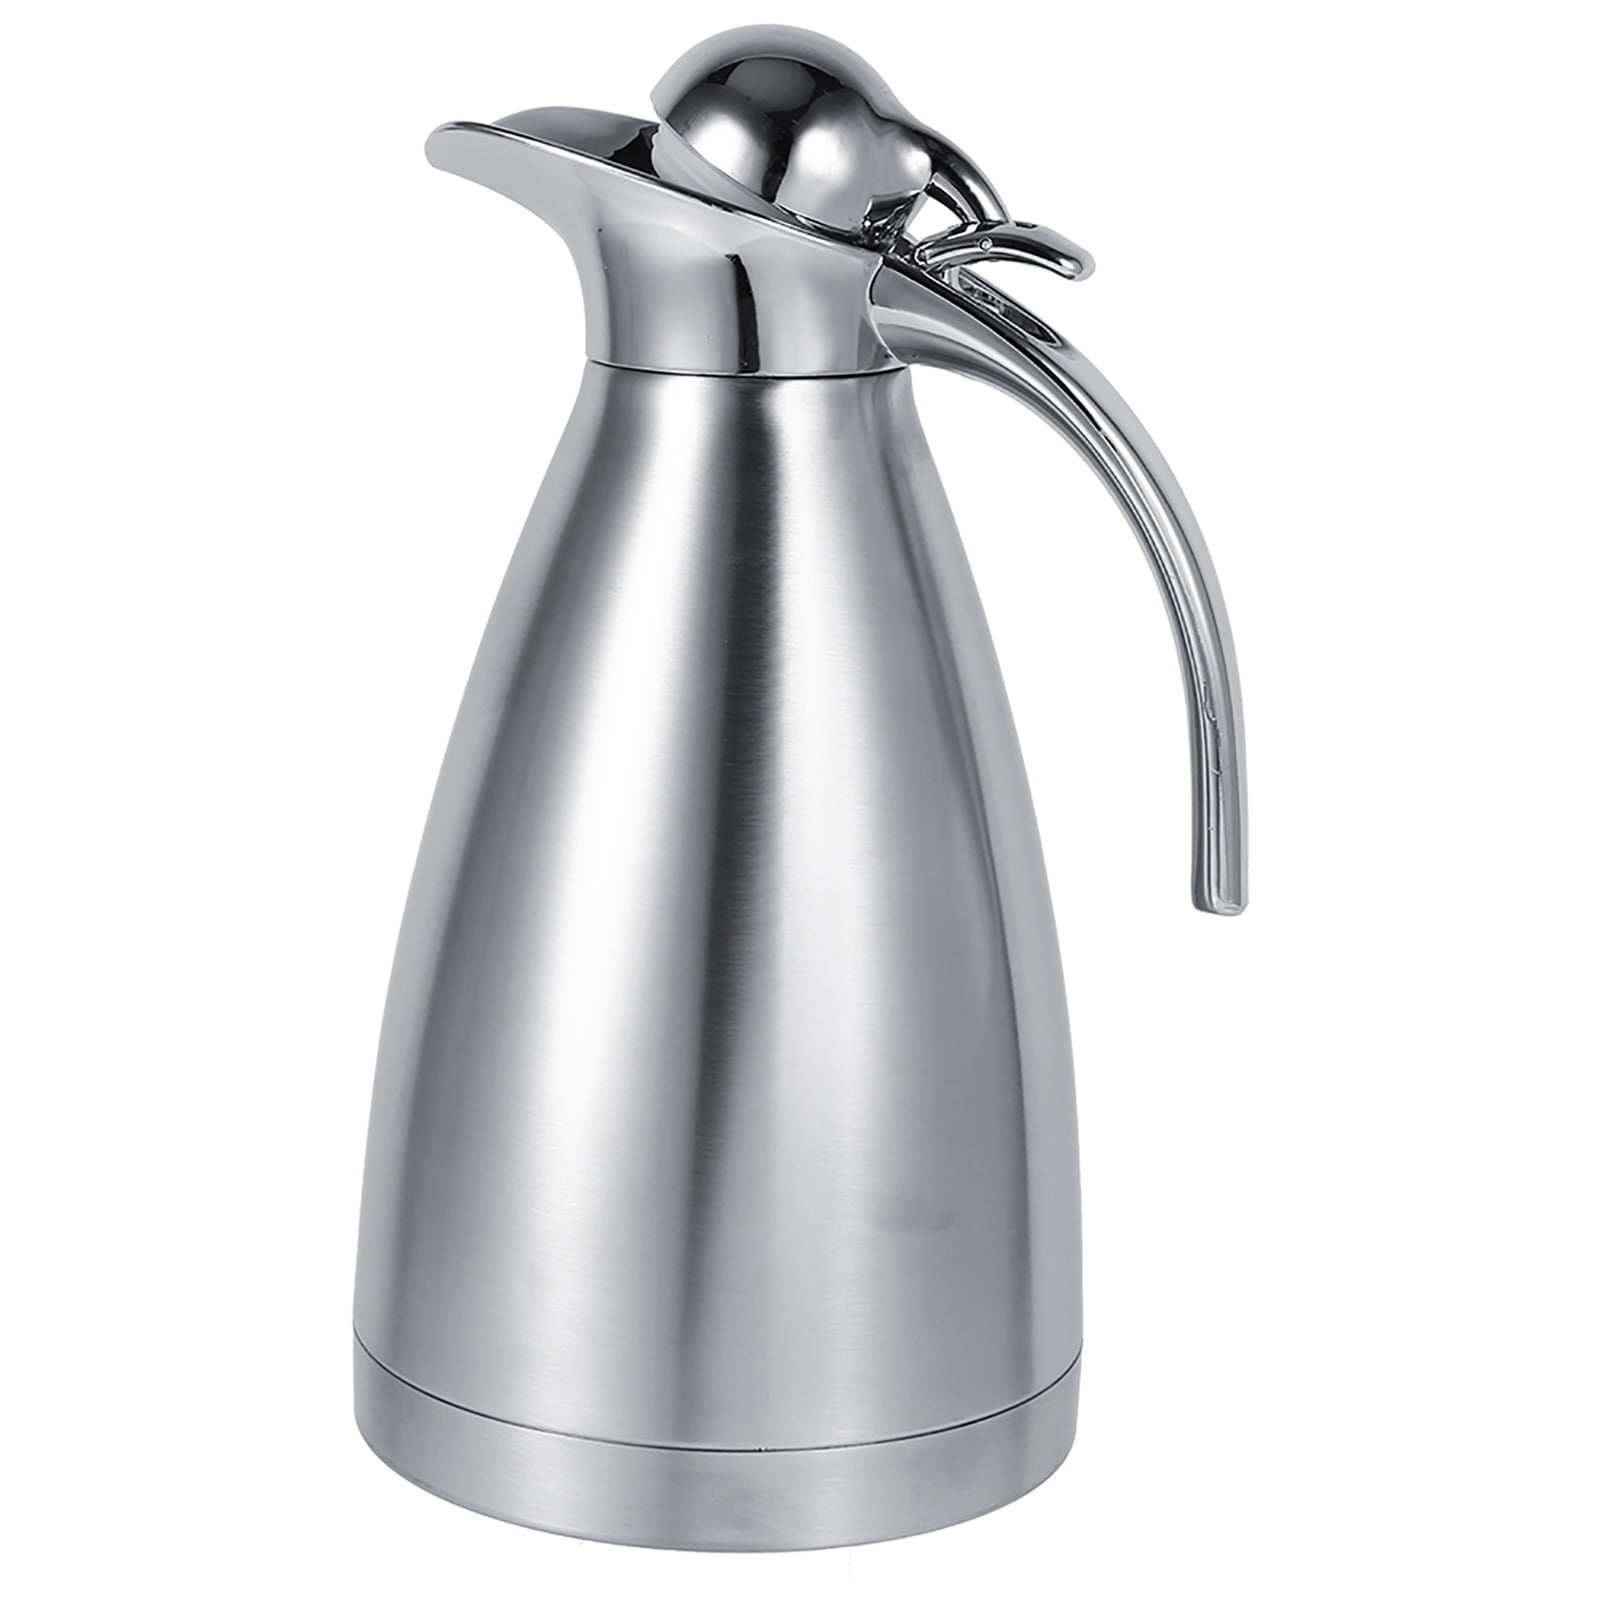 Stainless Steel Coffee Tea Pot Used for Coffee Water or Any Other Drinks Double Wall Vacuum Insulated Thermo Jug Coffee Carafe Milk 1.5L Blue 